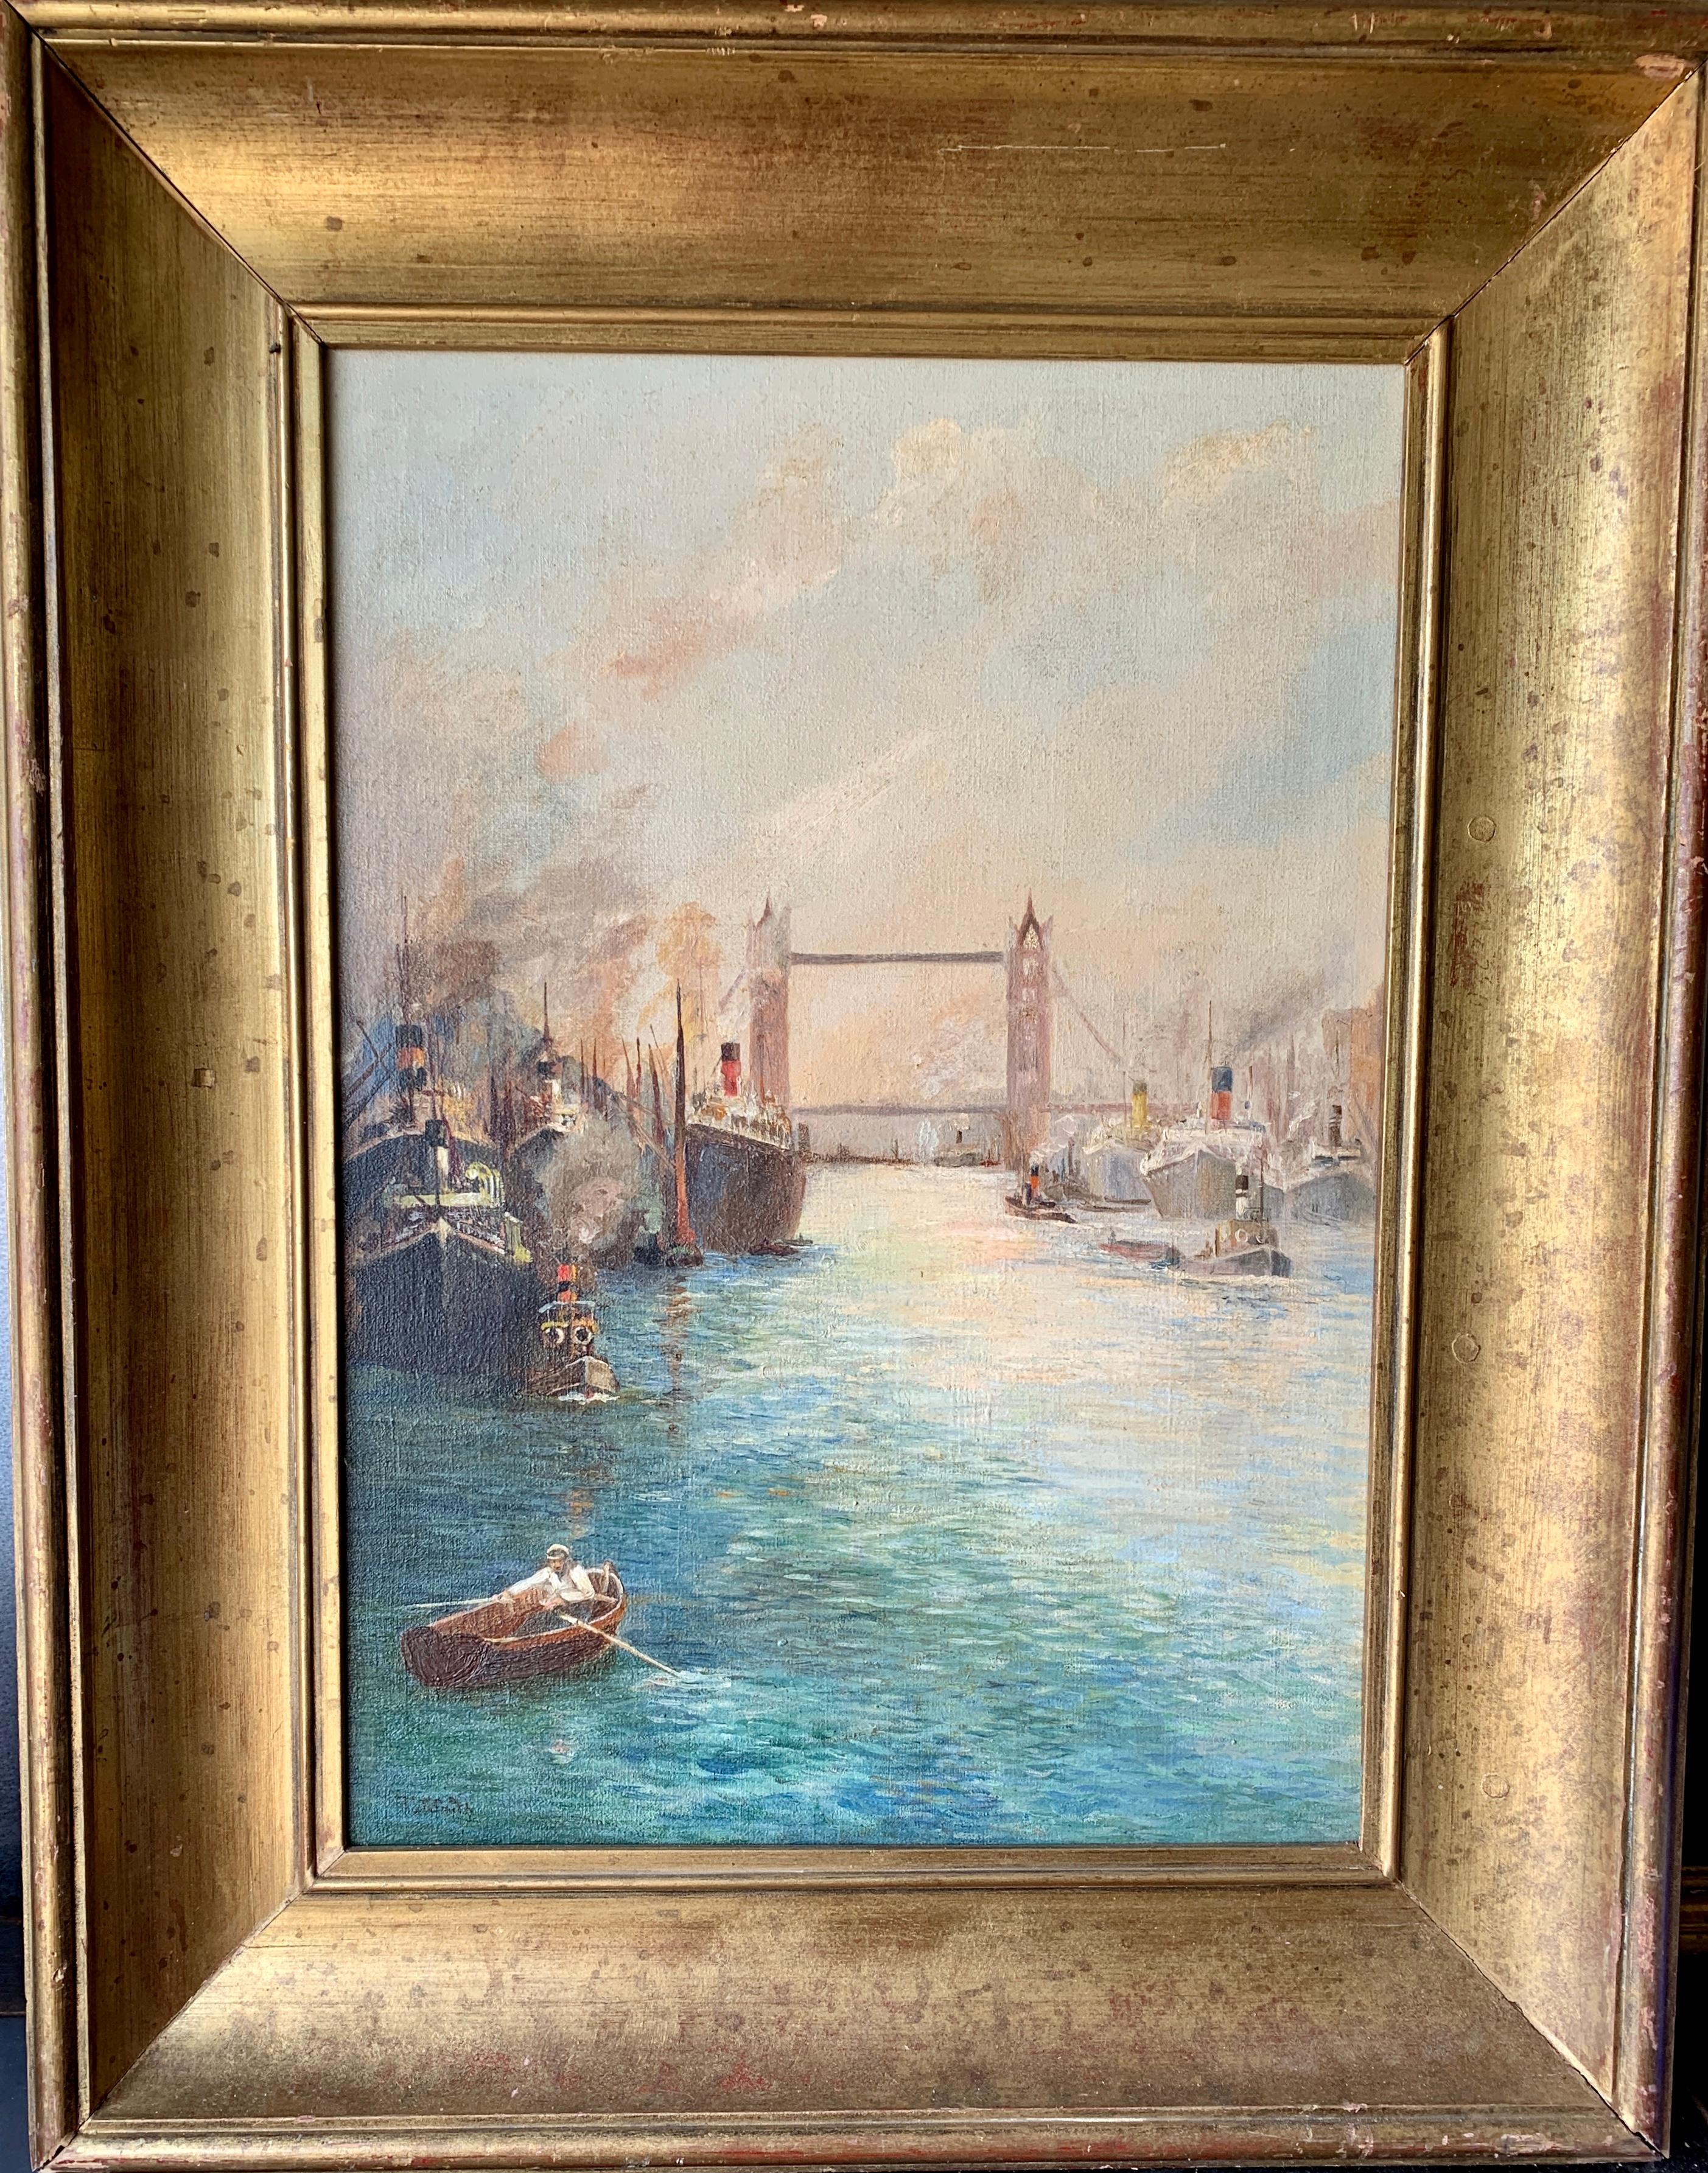 20th century View of Tower Bridge on the Thames in London, with boats, men